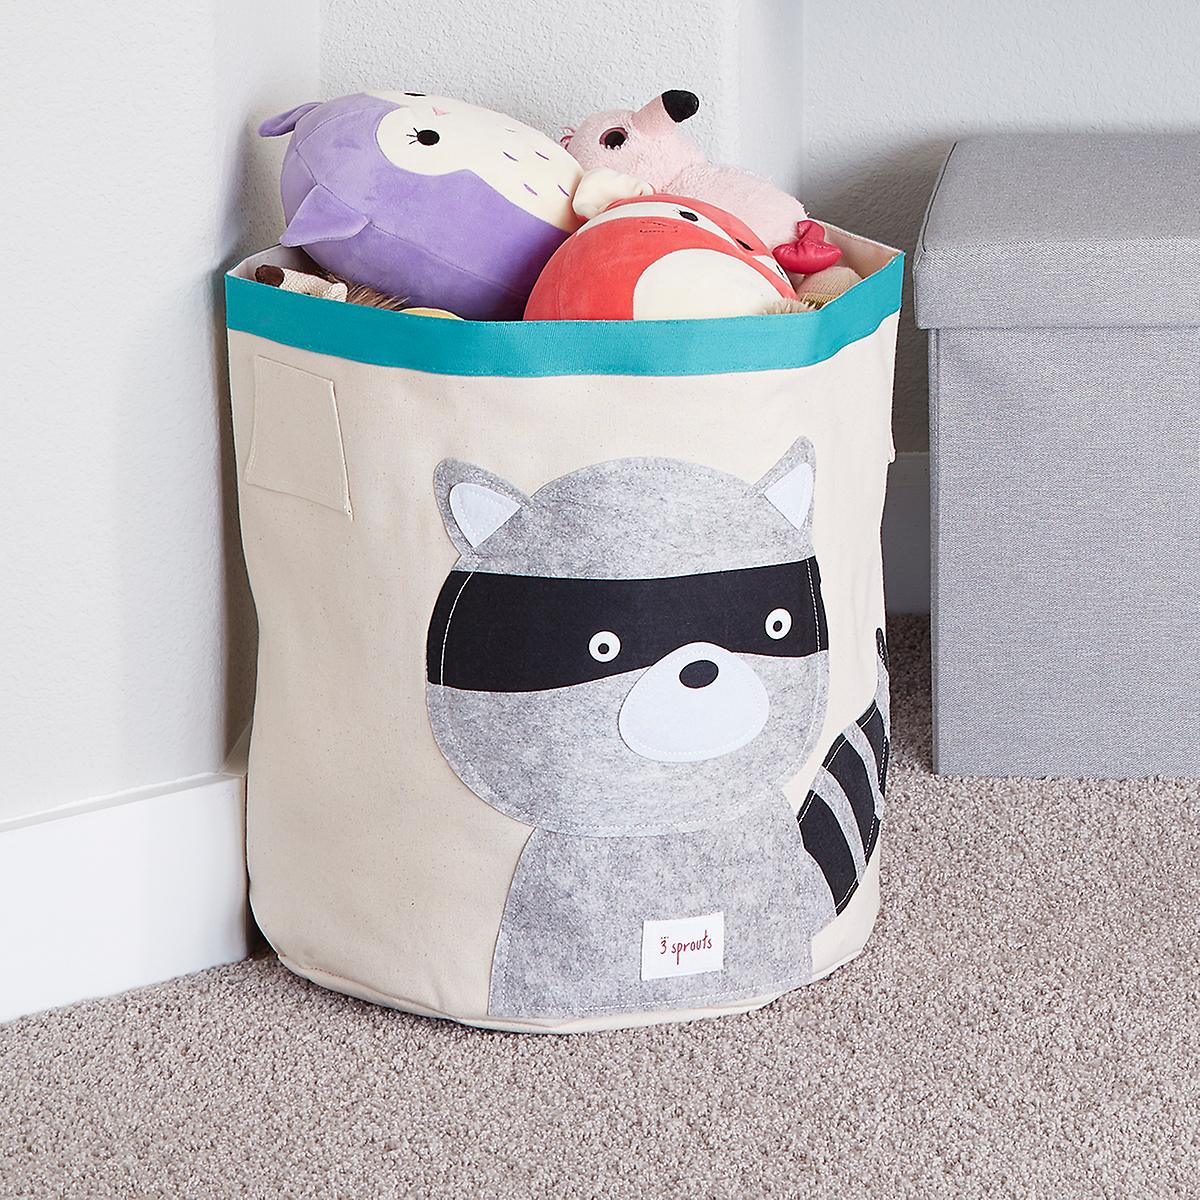 racoon canvas bin holding stuffed animals in playroom #3sprouts